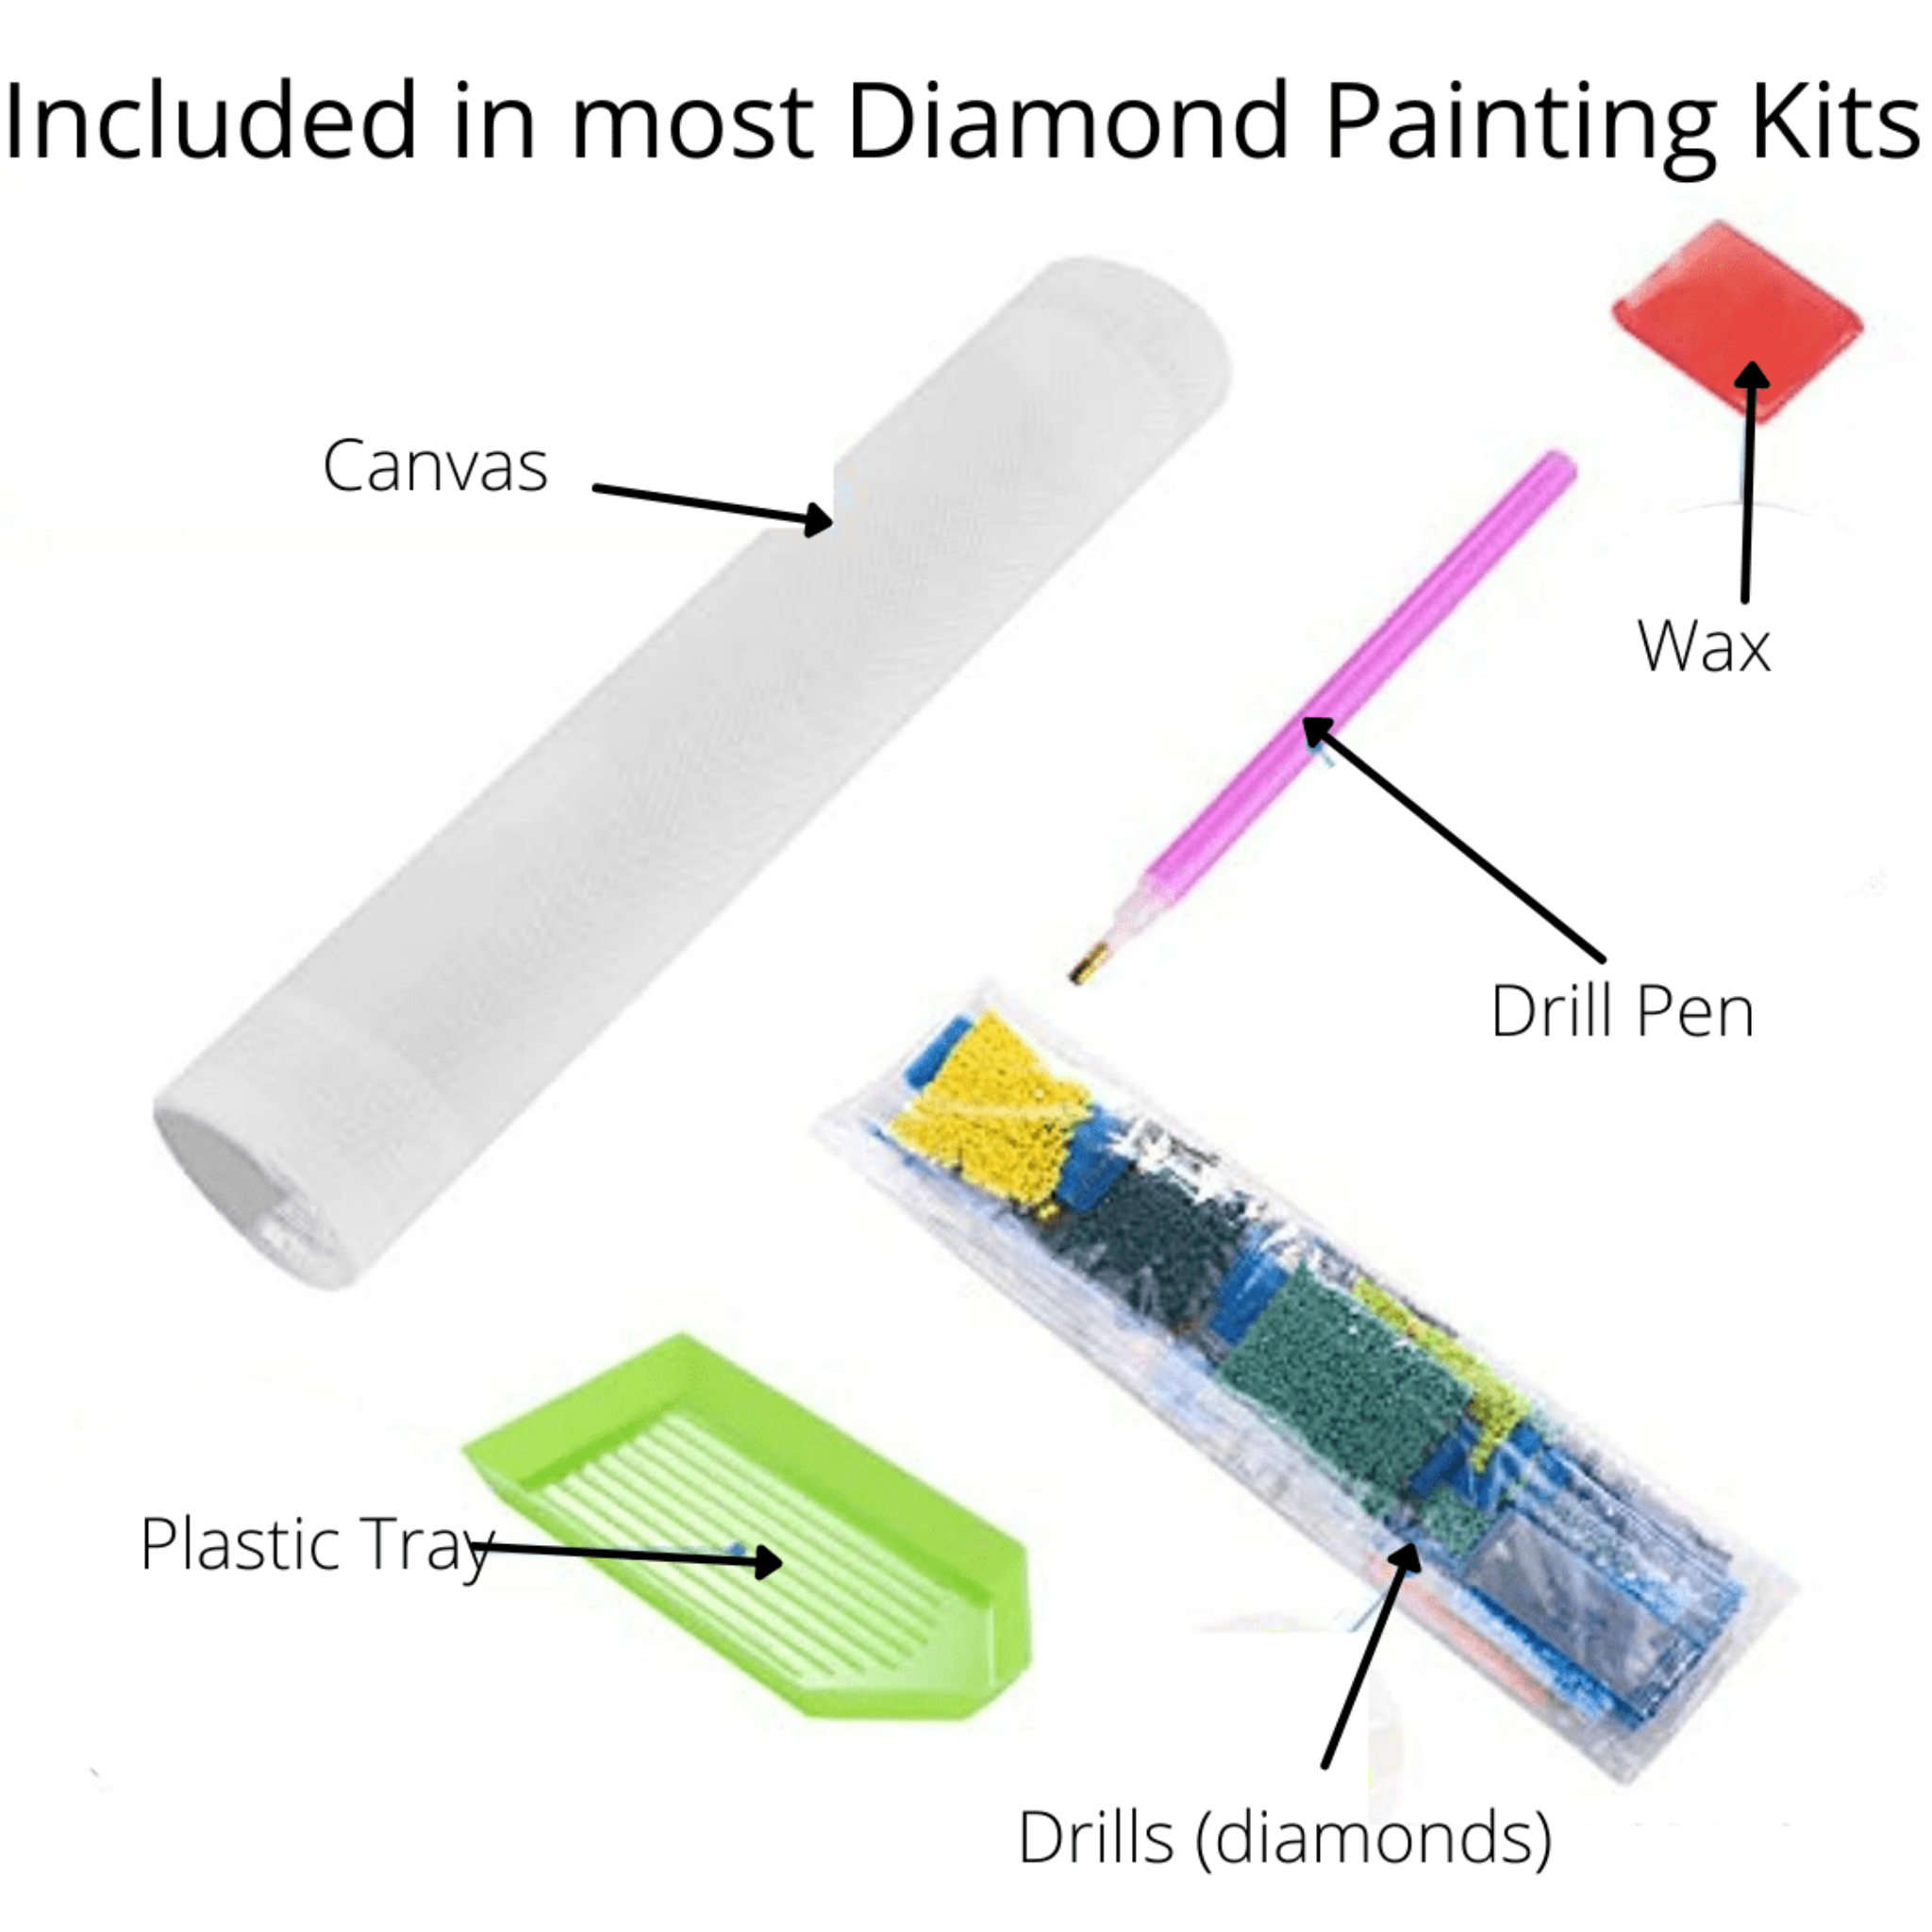 Mystery Diamond Painting Kit - Full Drill - Square and Round